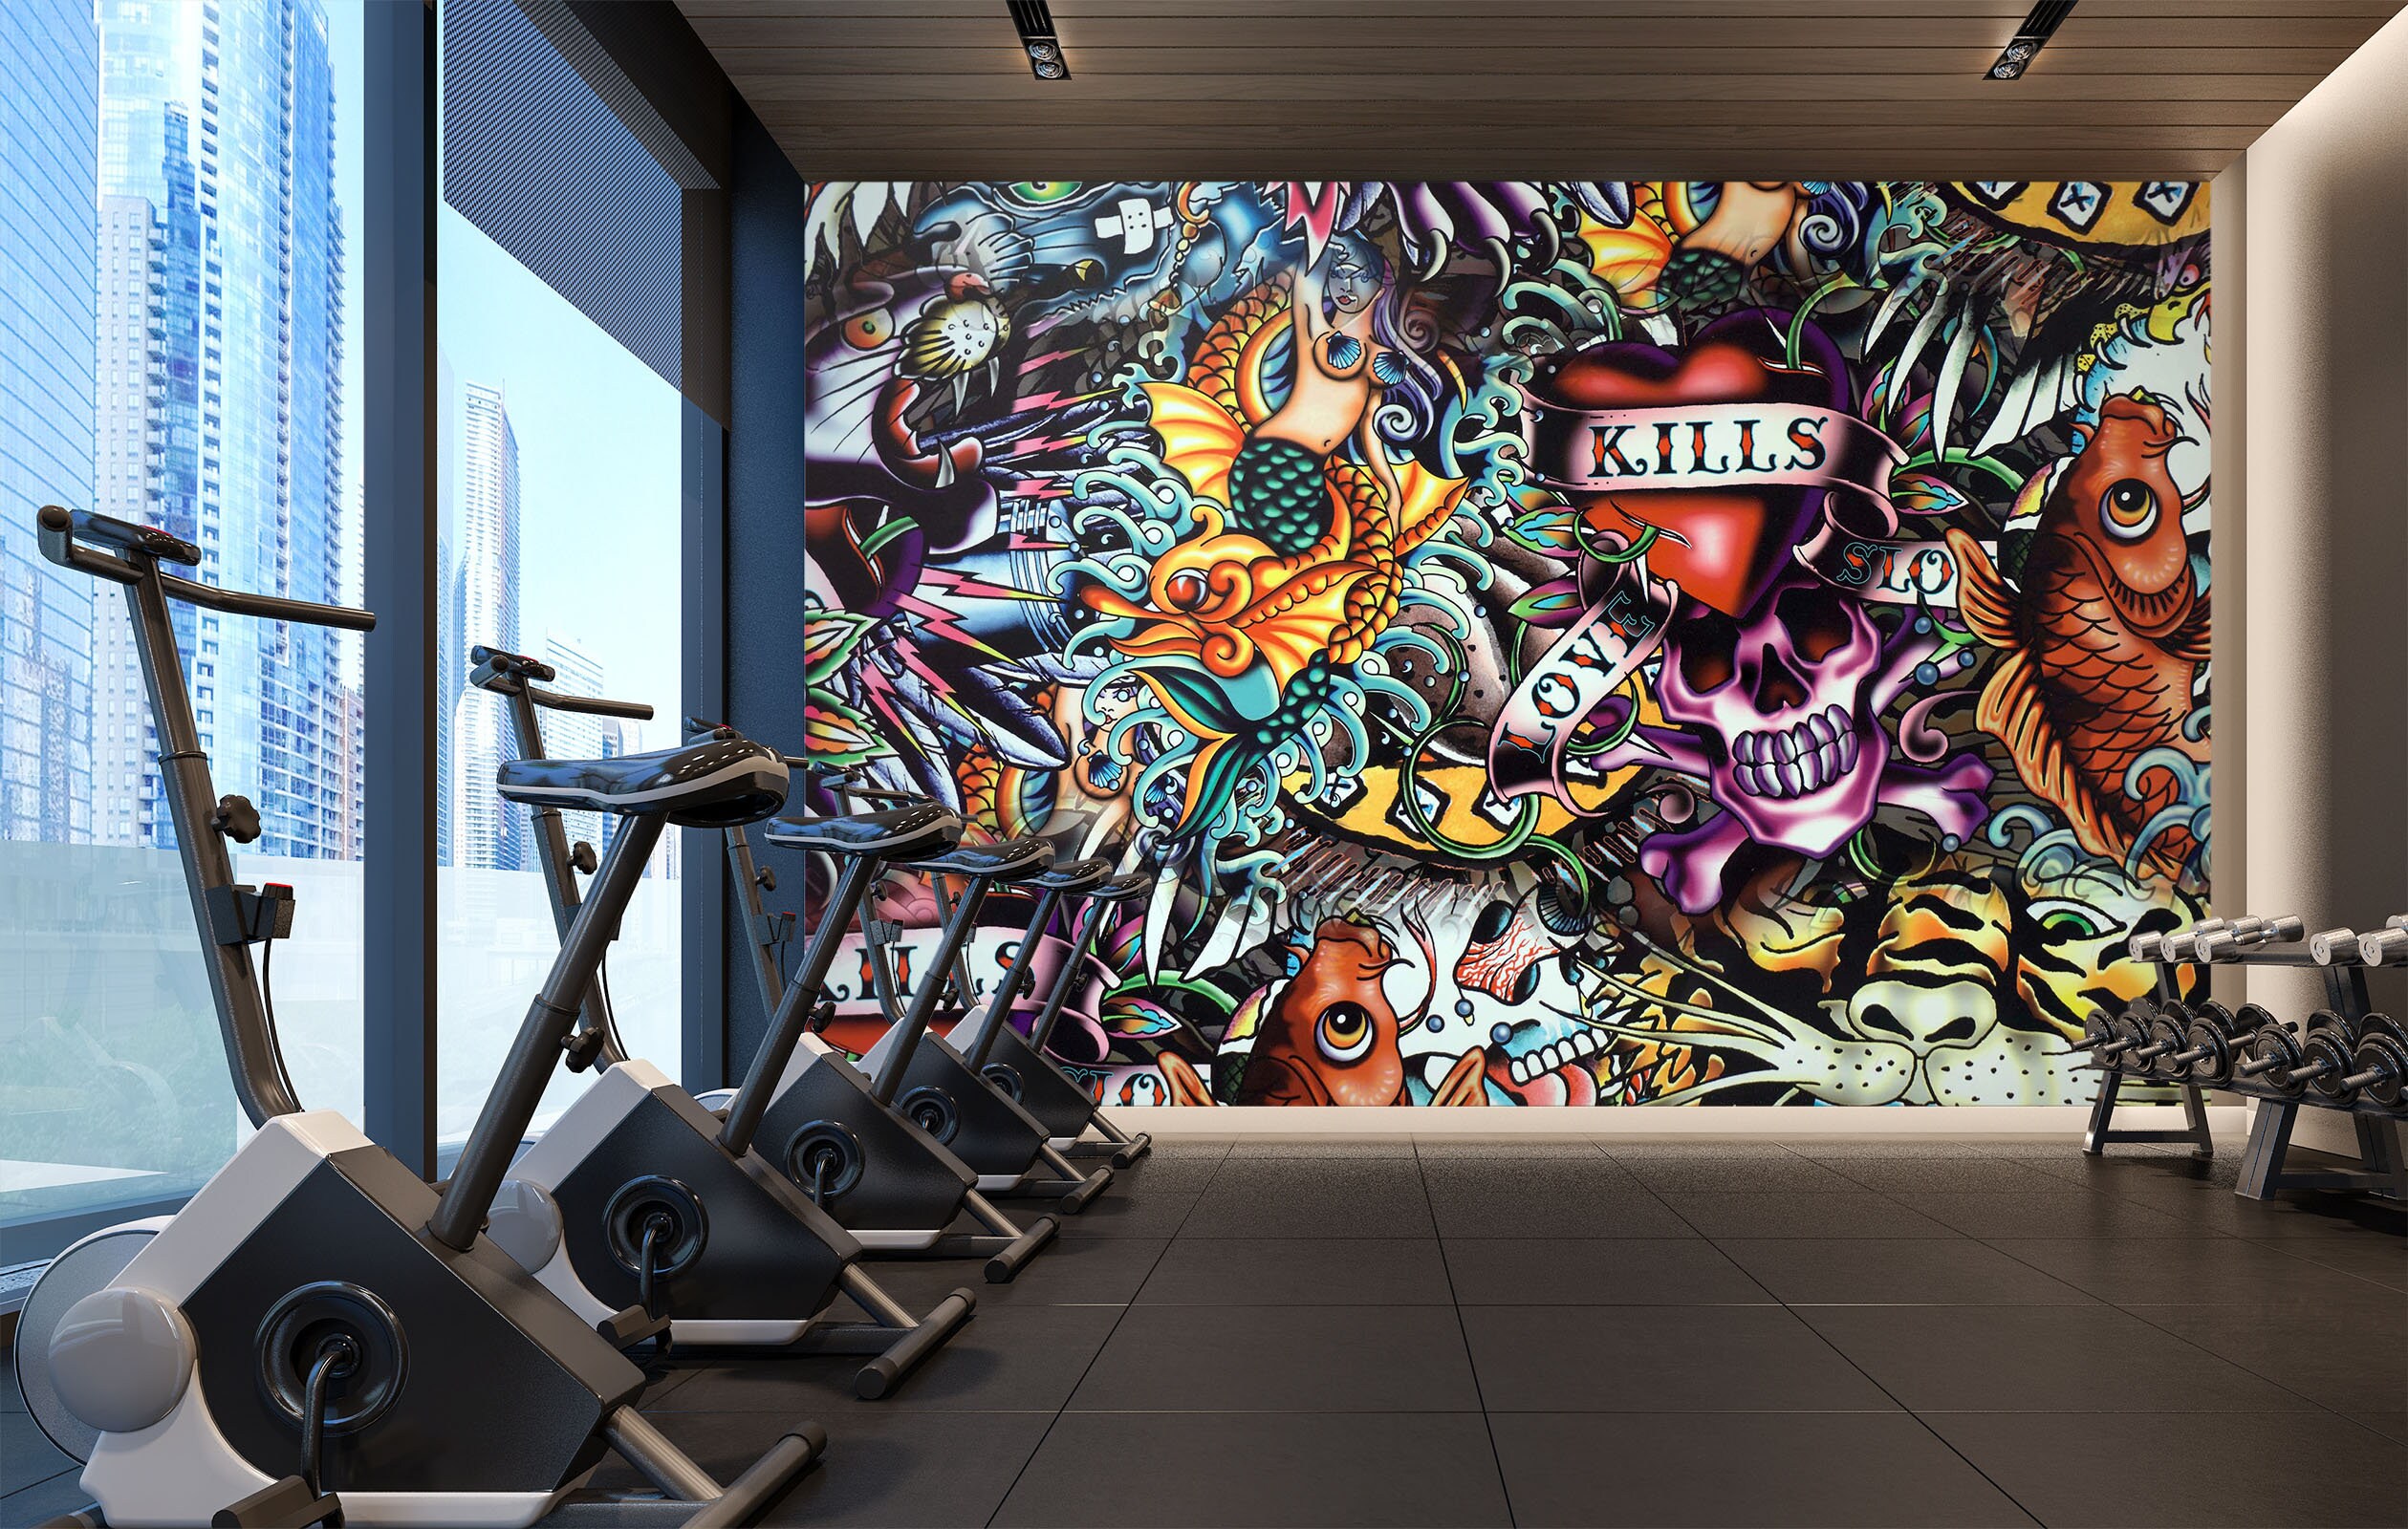 Wallpaper Murals for Gyms & Leisure Centres